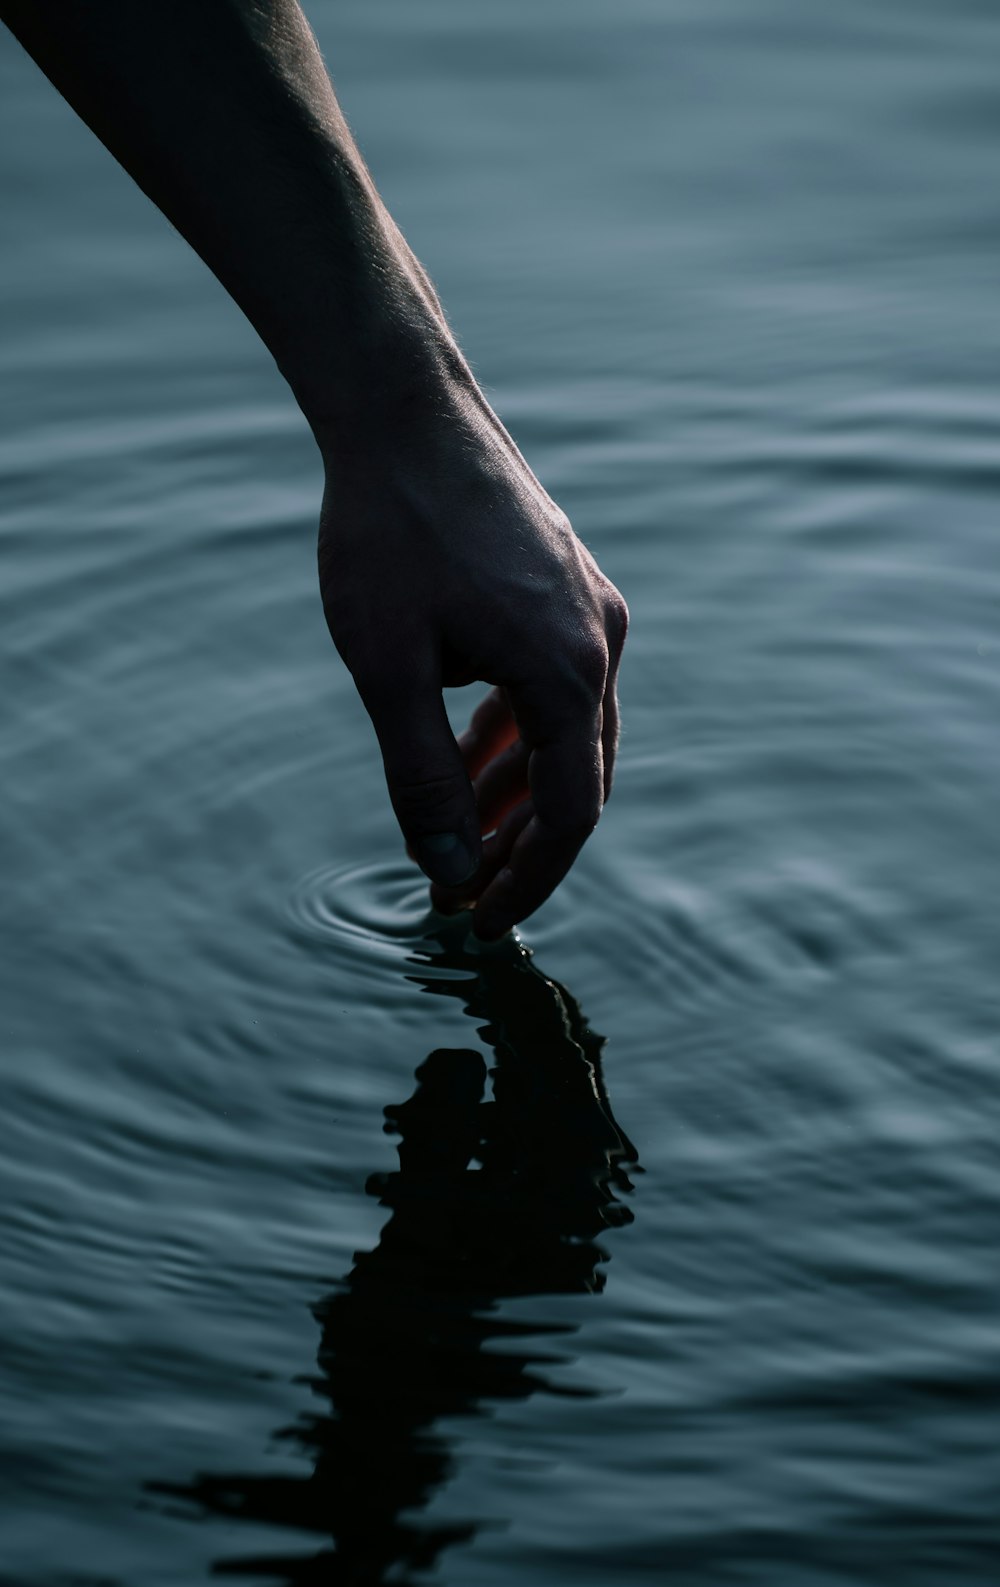 a hand reaching for something in the water